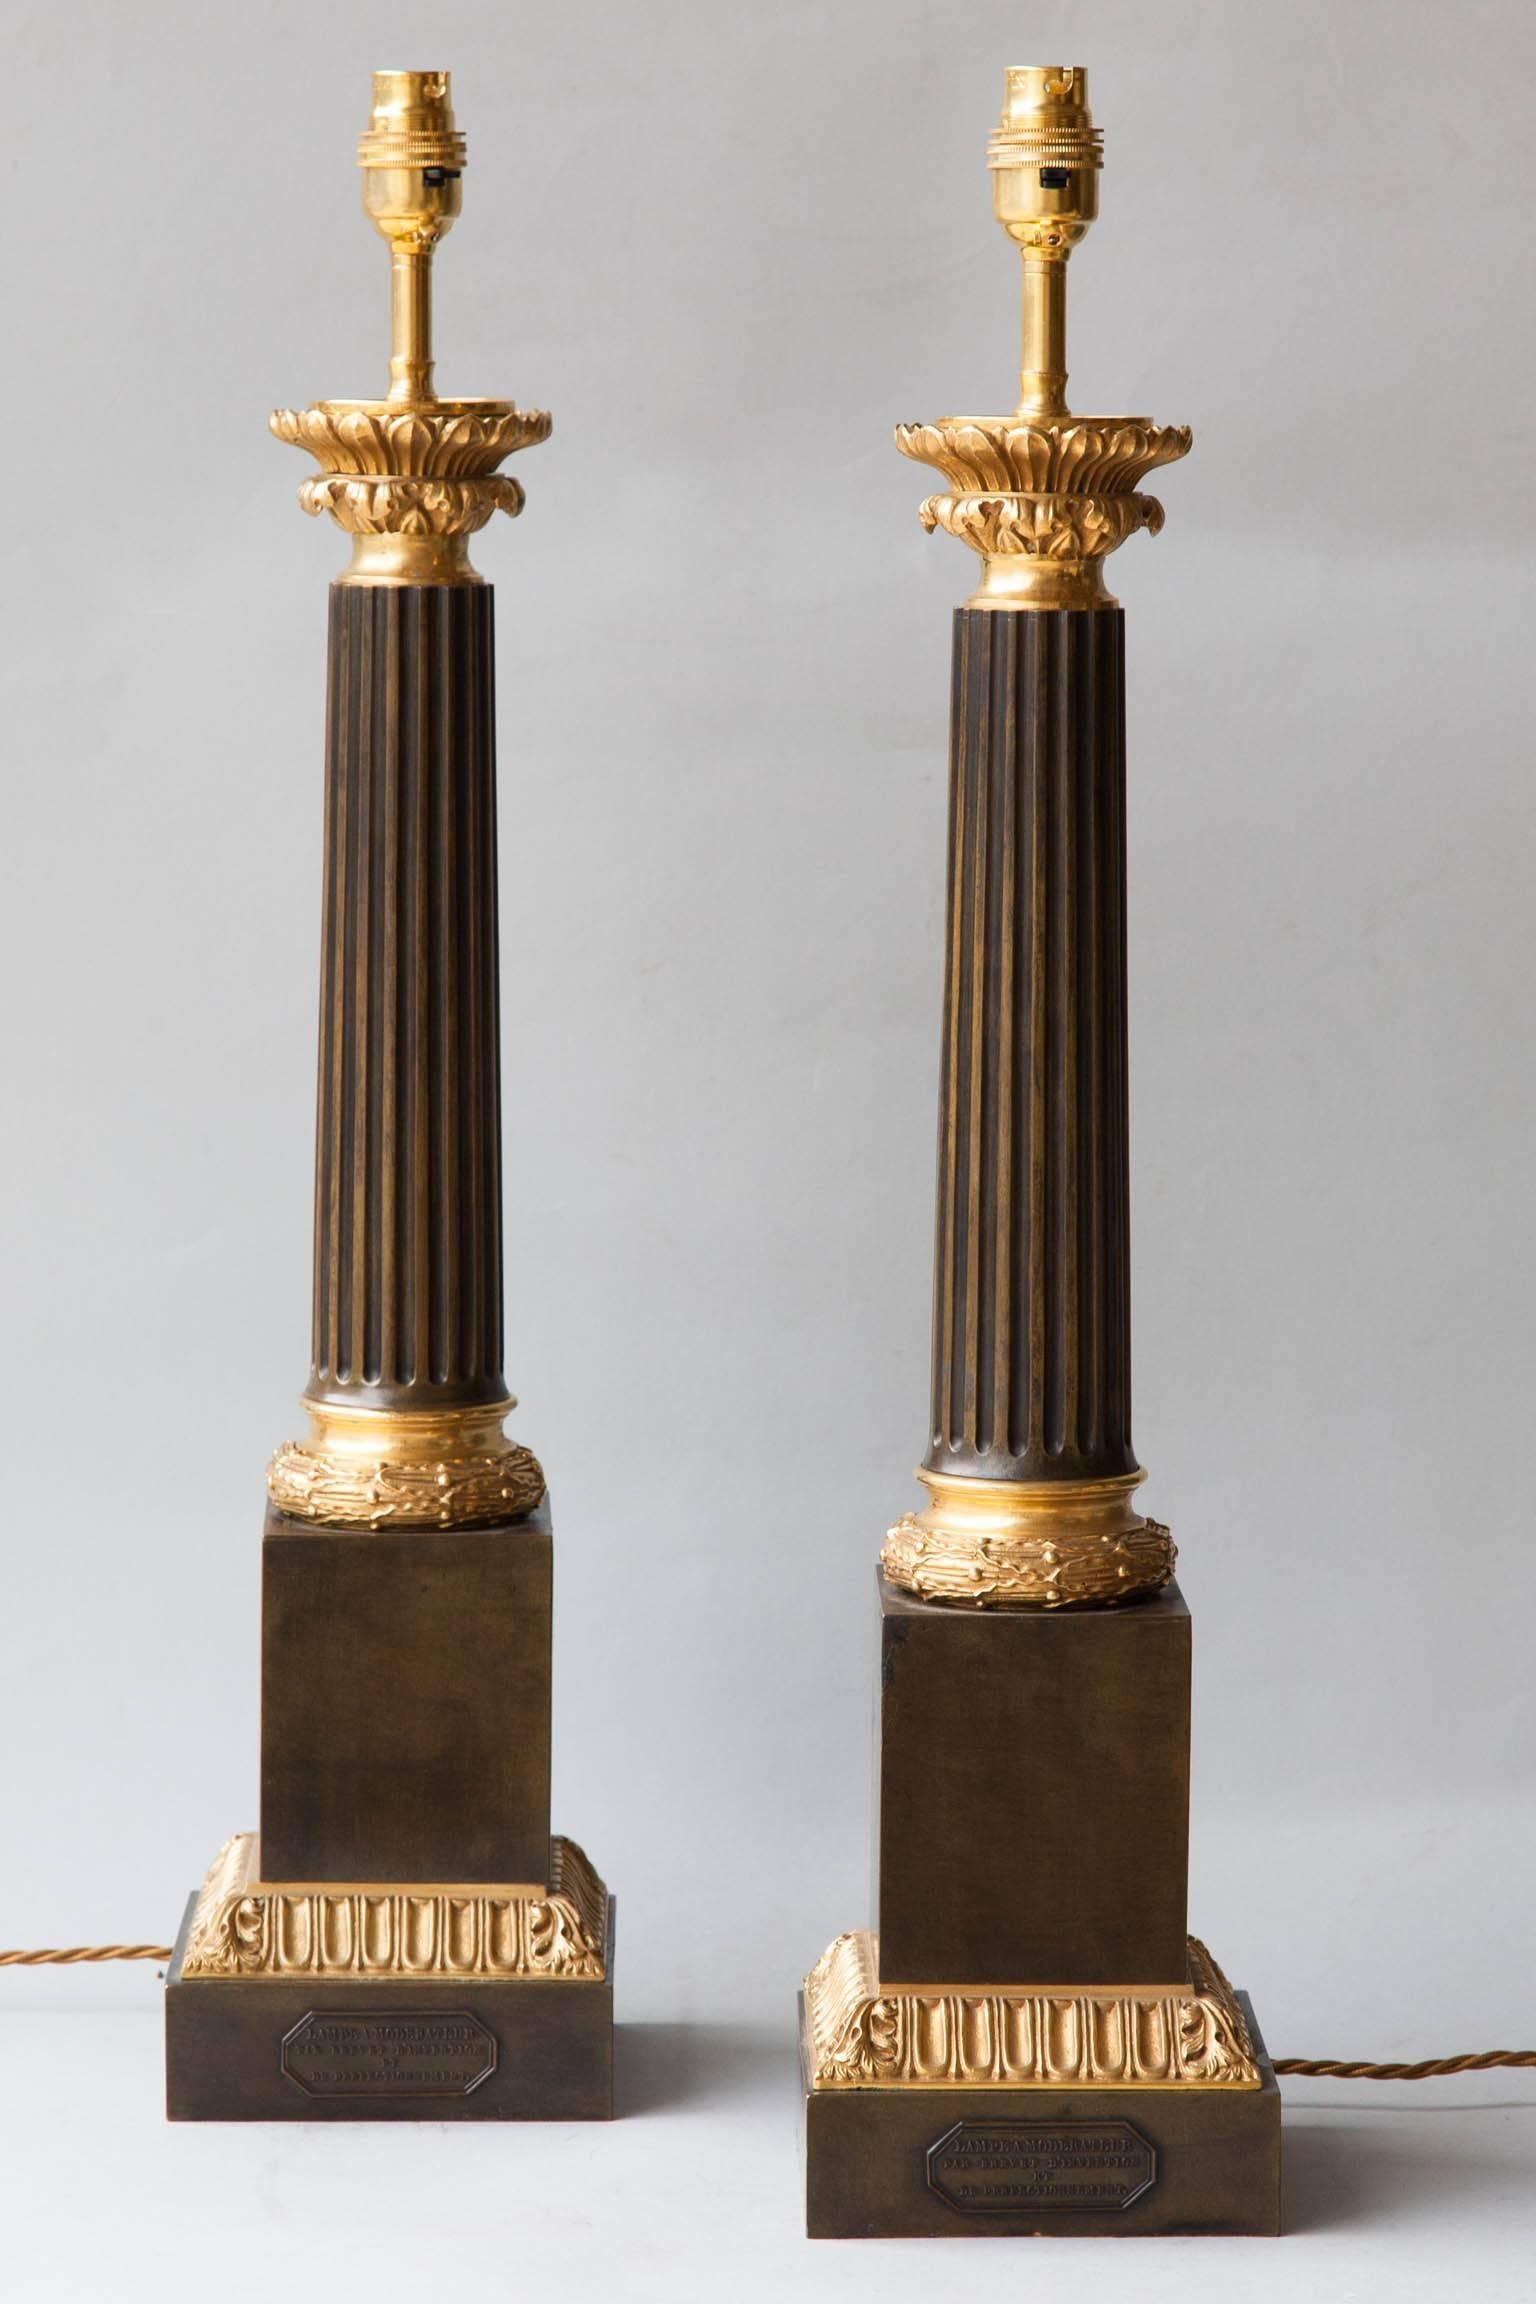 Gilt bronze mounts with foliat leaf and berry and acanthus leaf decoration in relief. Central fluted columns supported on a plinth base. 
Stamped 'Lampe a Moderateur/Par Brevet d‘Invention et de Perfectionnement', known as moderator lamps, this